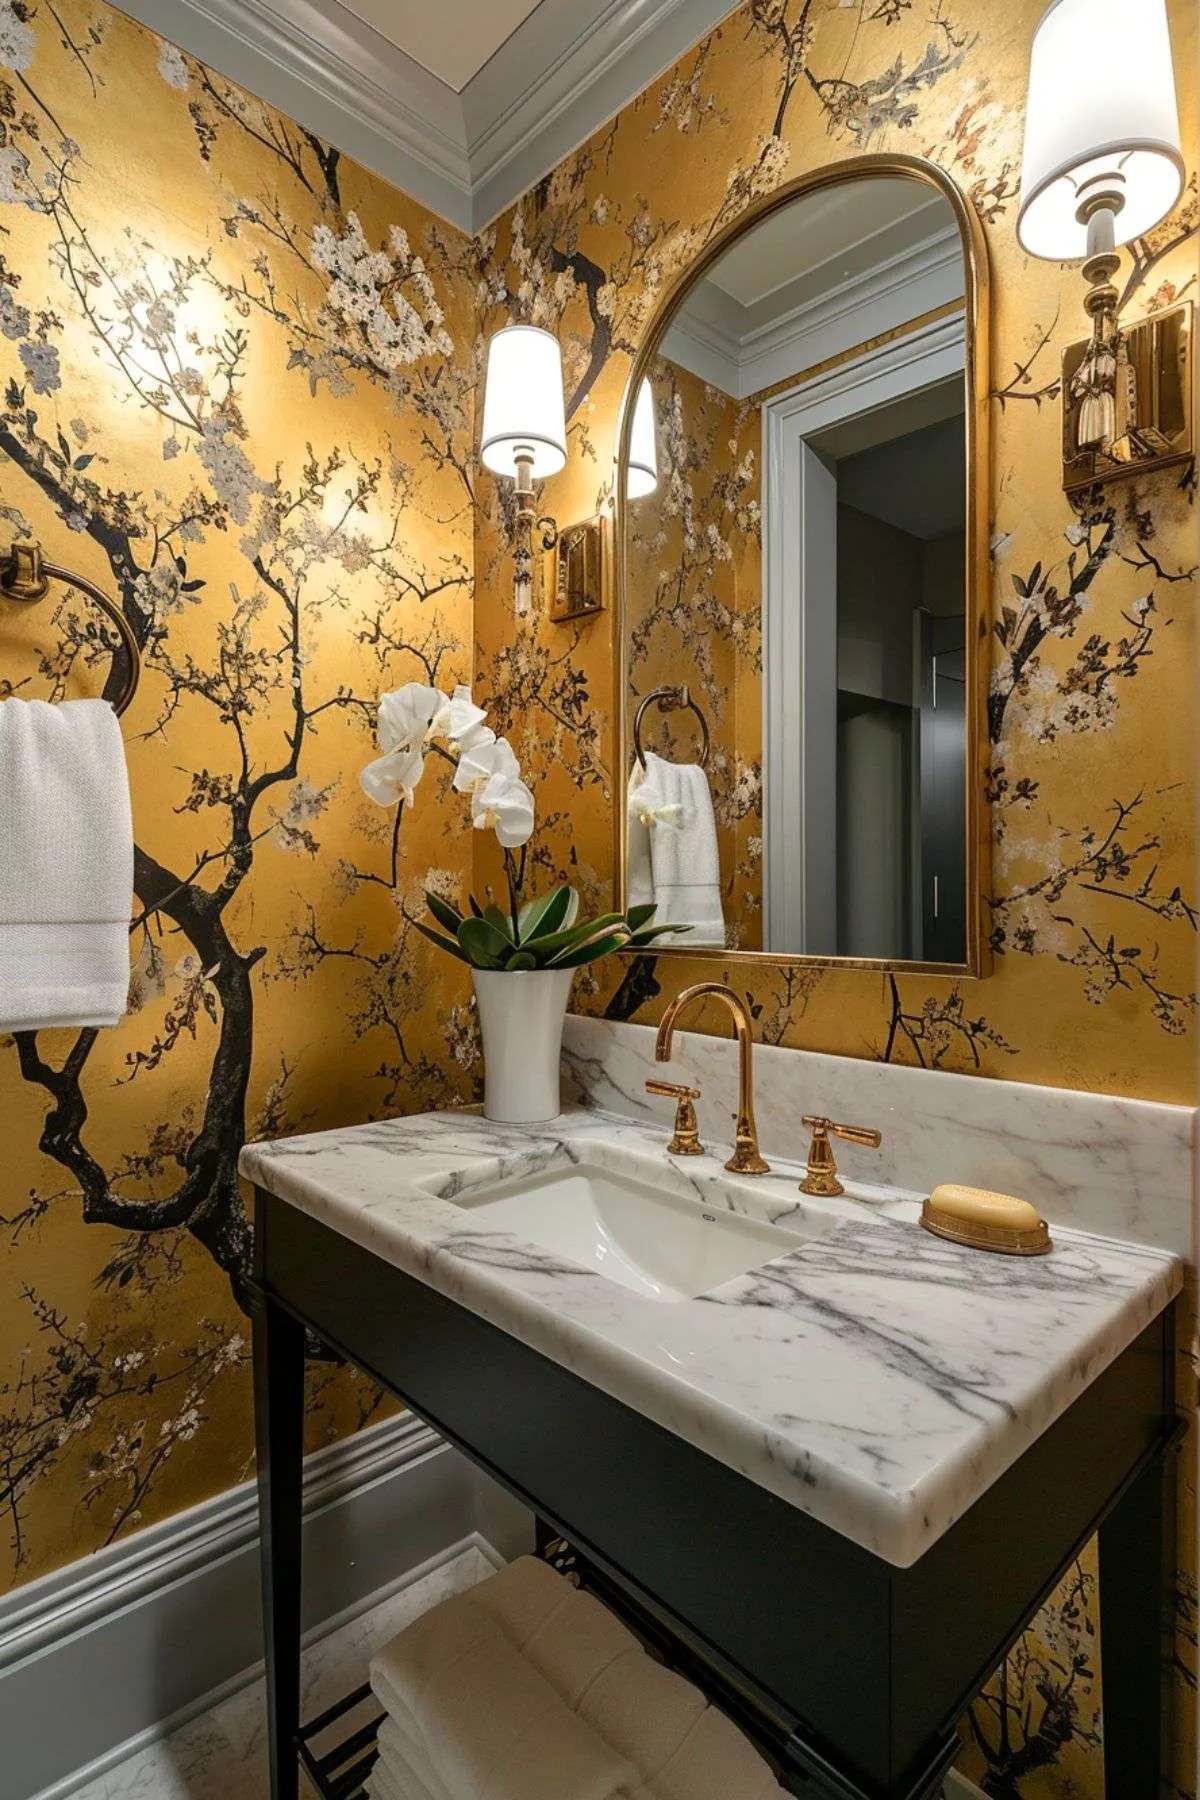 The Benefits of Peel-and-Stick Wallpaper for a Bathroom Design